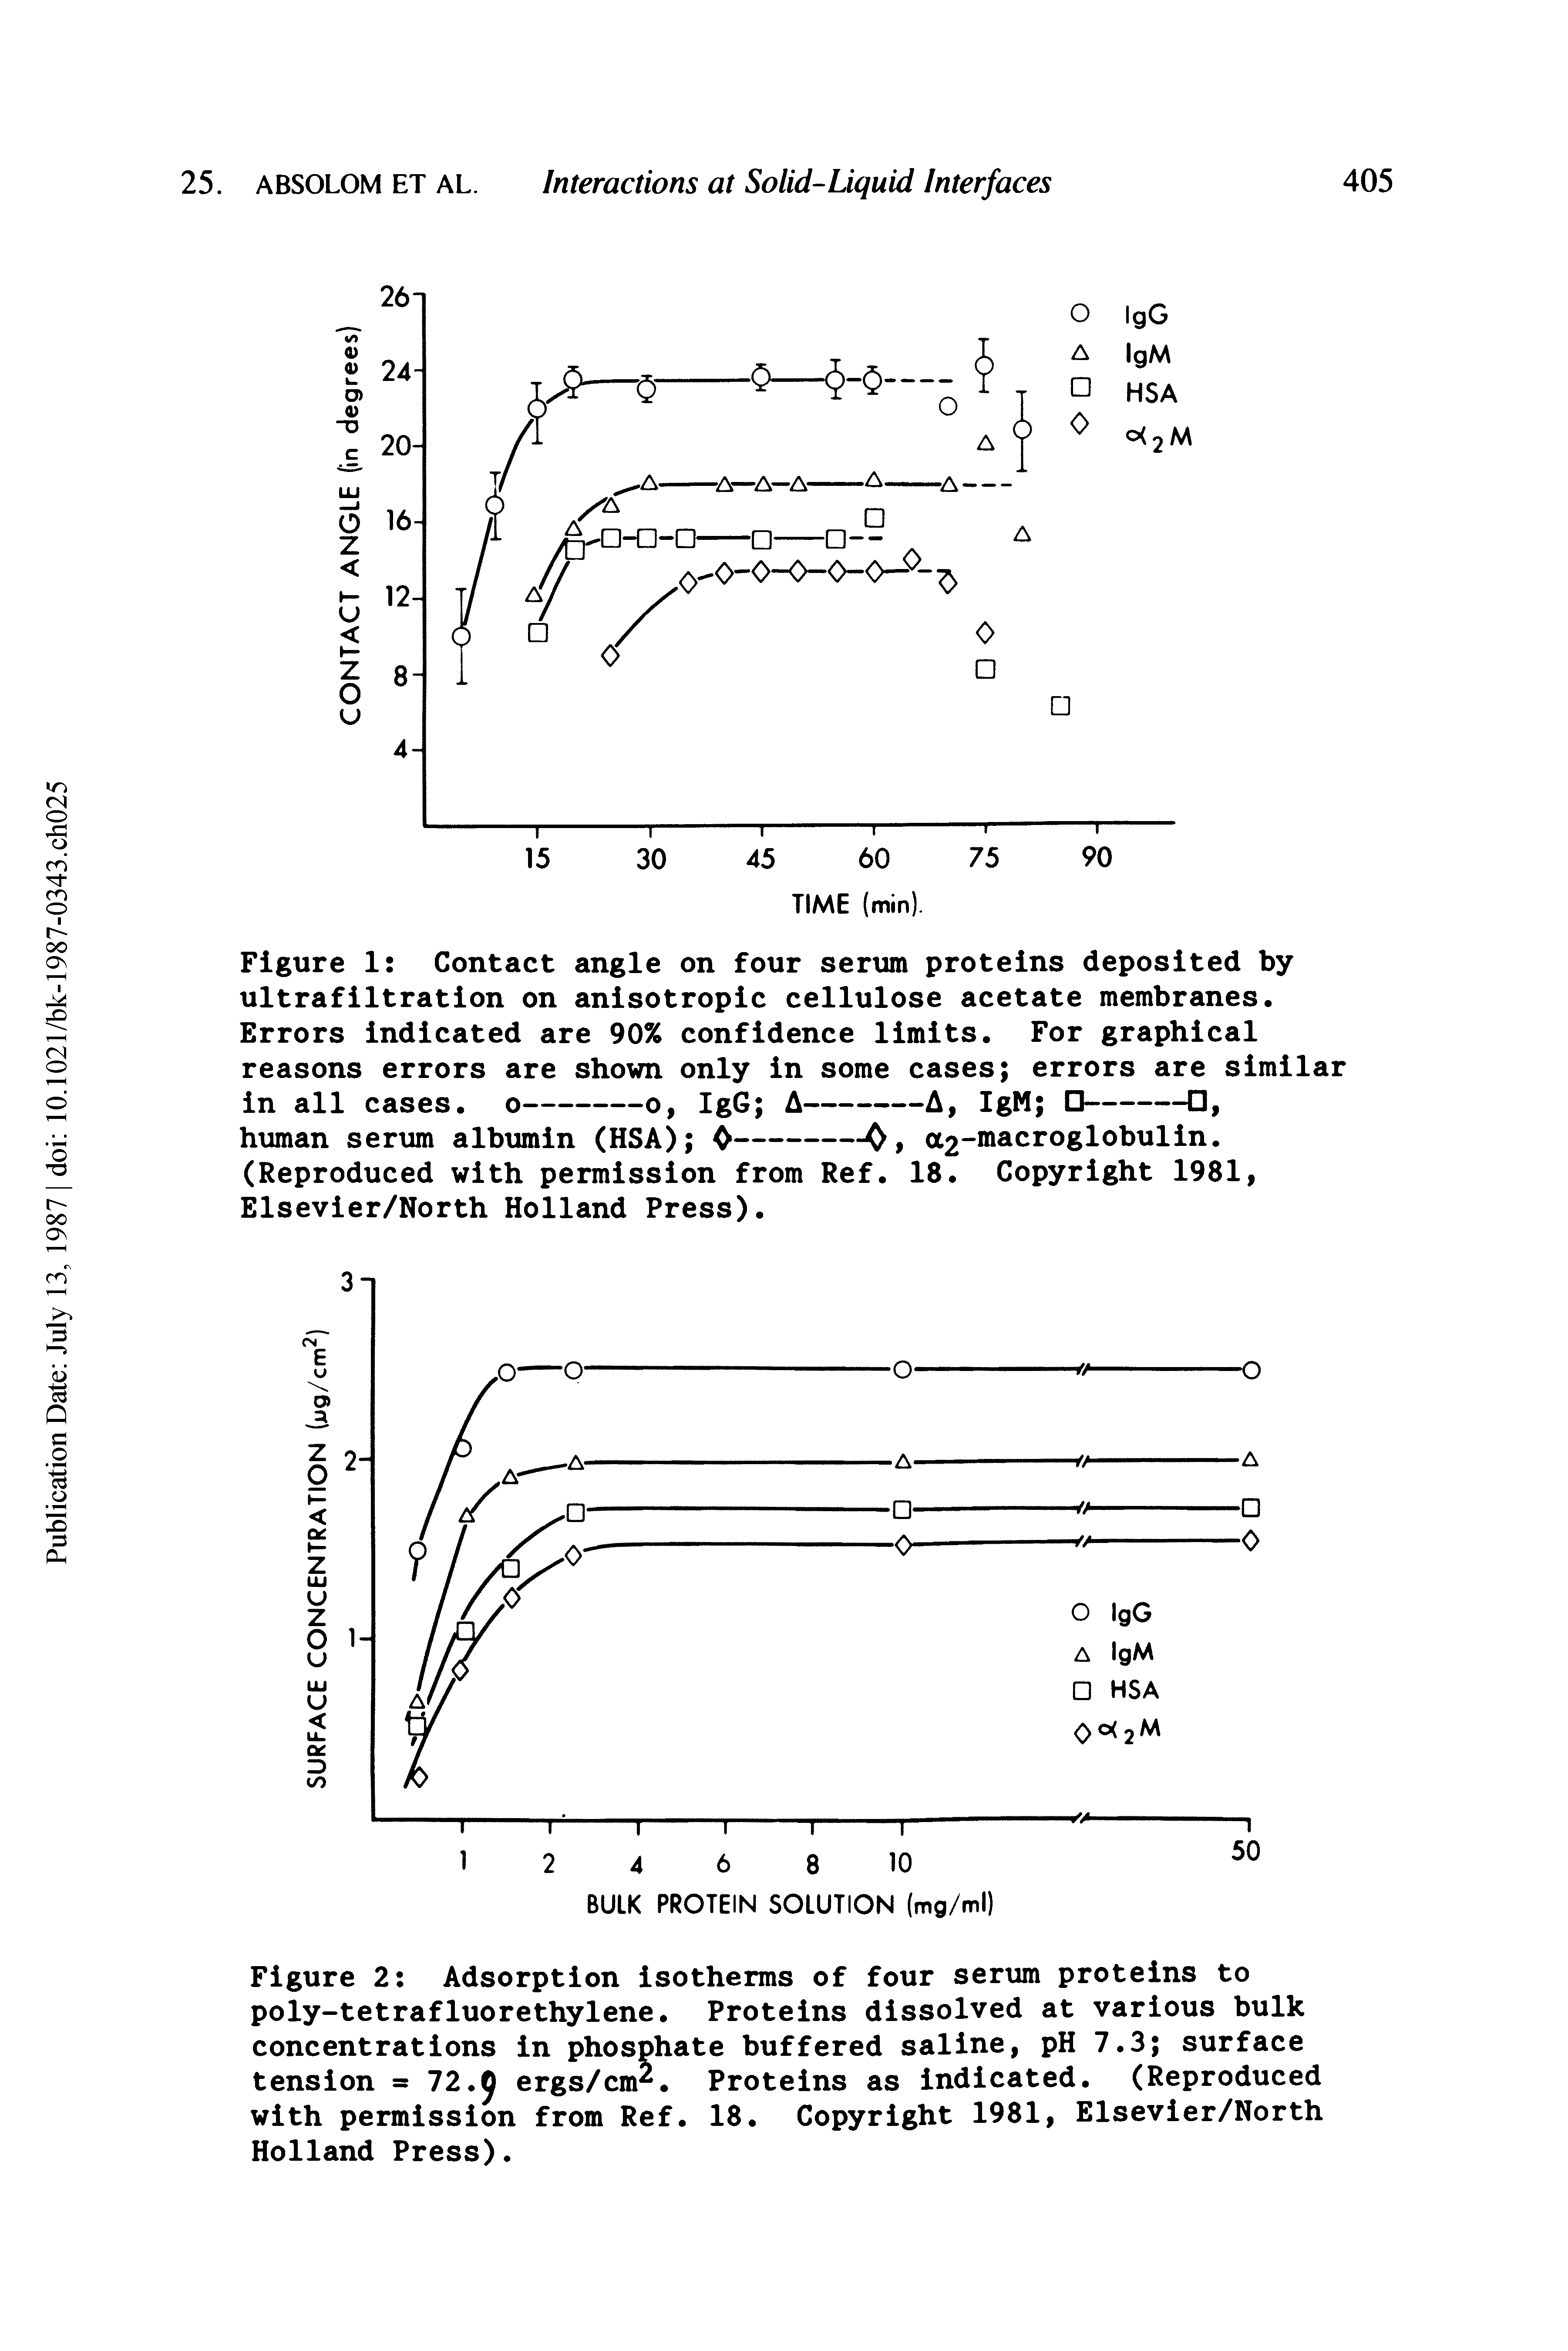 Figure 2 Adsorption isotherms of four serum proteins to poly-tetrafluorethylene. Proteins dissolved at various bulk concentrations in phosphate buffered saline, pH 7.3 surface tension =72.0 ergs/cm. Proteins as indicated. (Reproduced with permission from Ref. 18. Copyright 1981, Elsevier/North Holland Press).